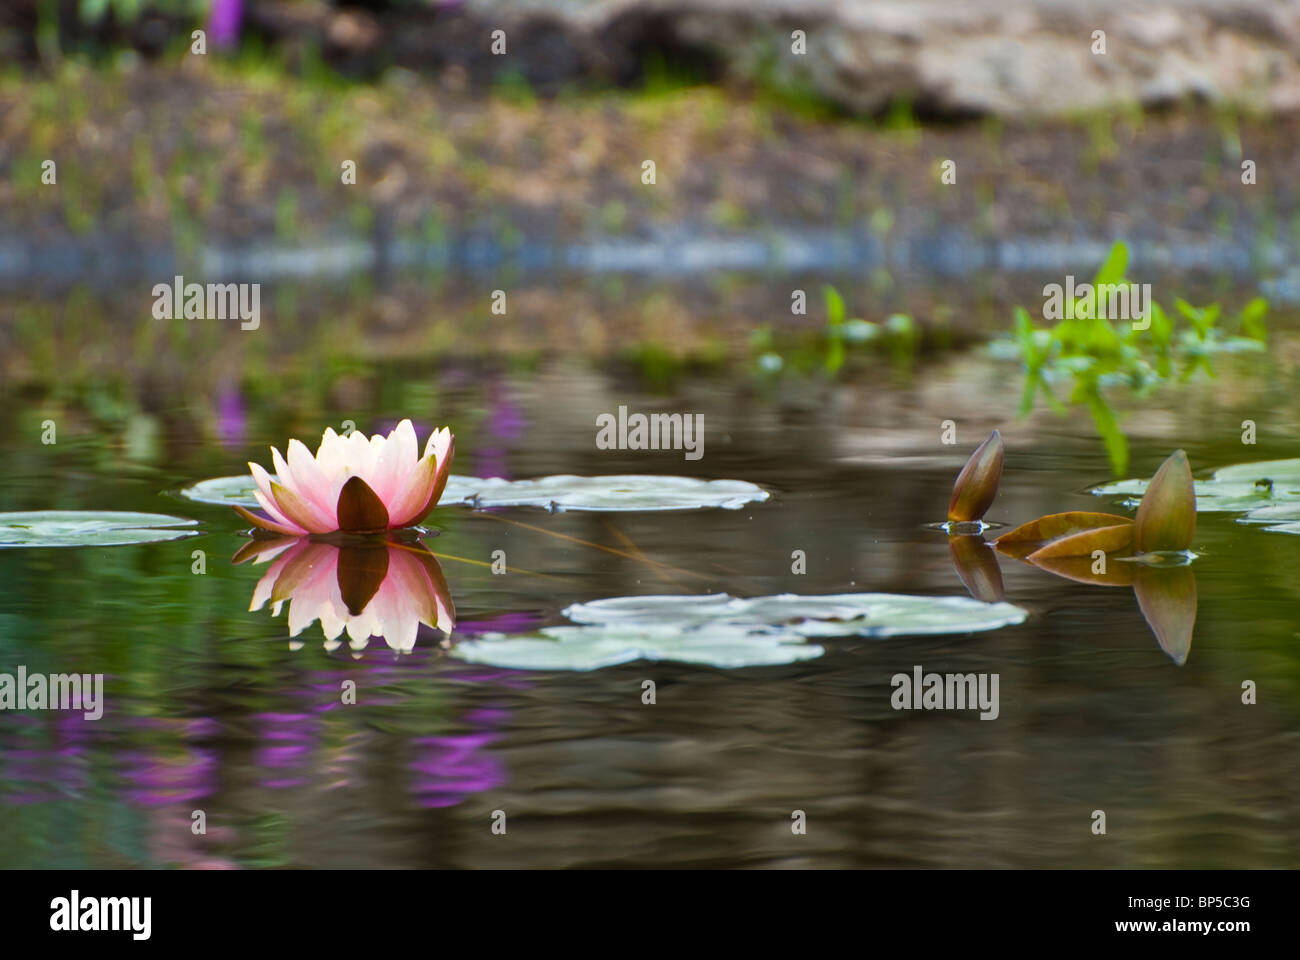 water lily in garden pond Stock Photo